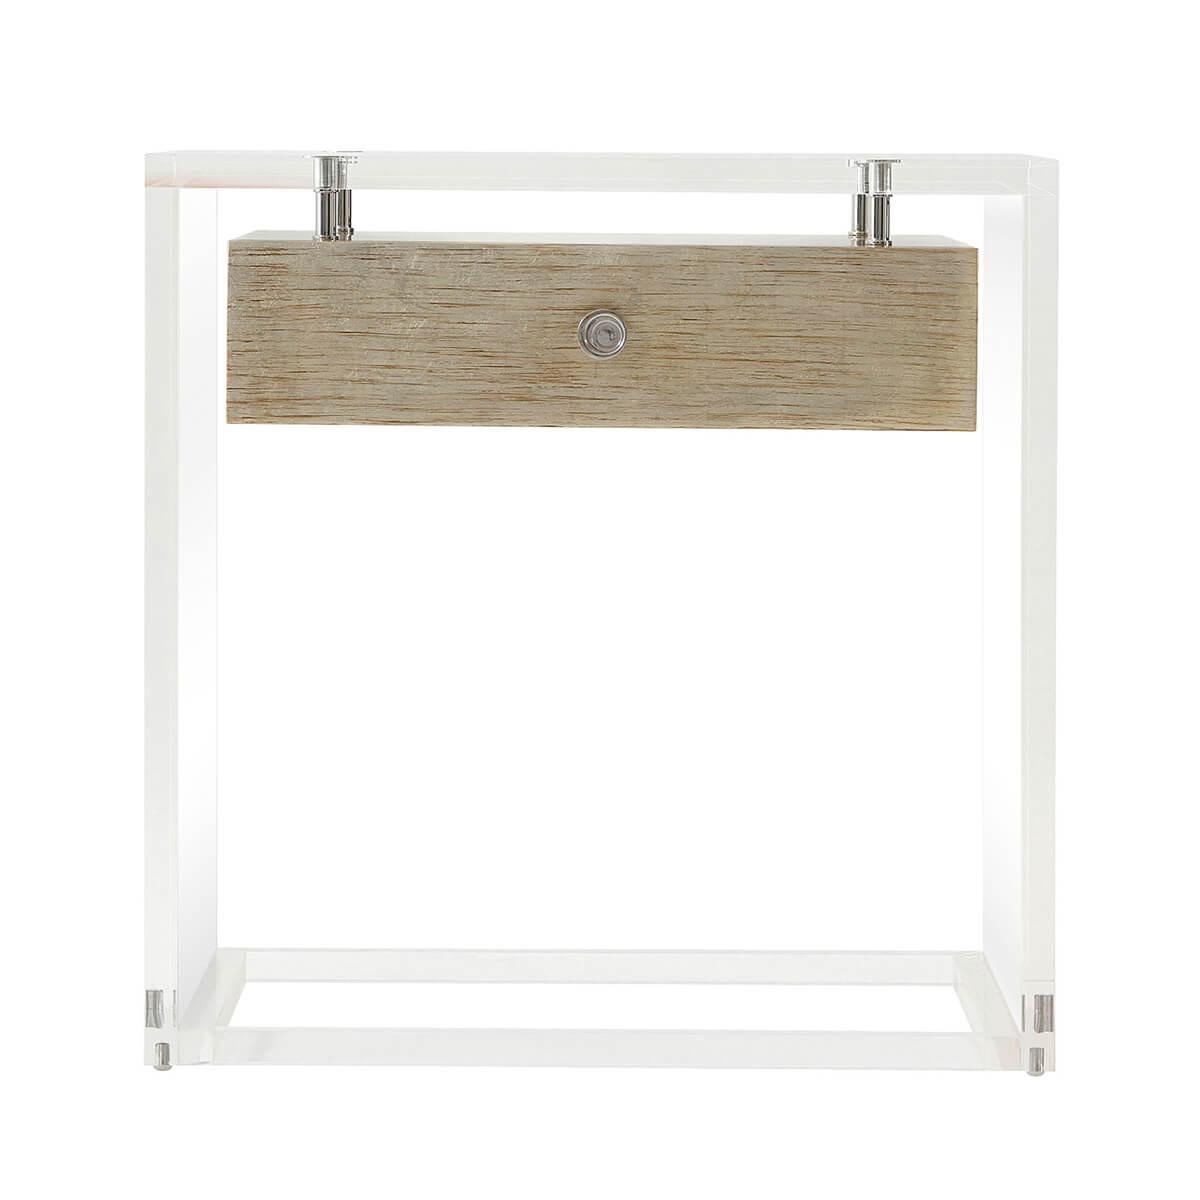 Vietnamese Modern Suspension Acrylic Side Table For Sale